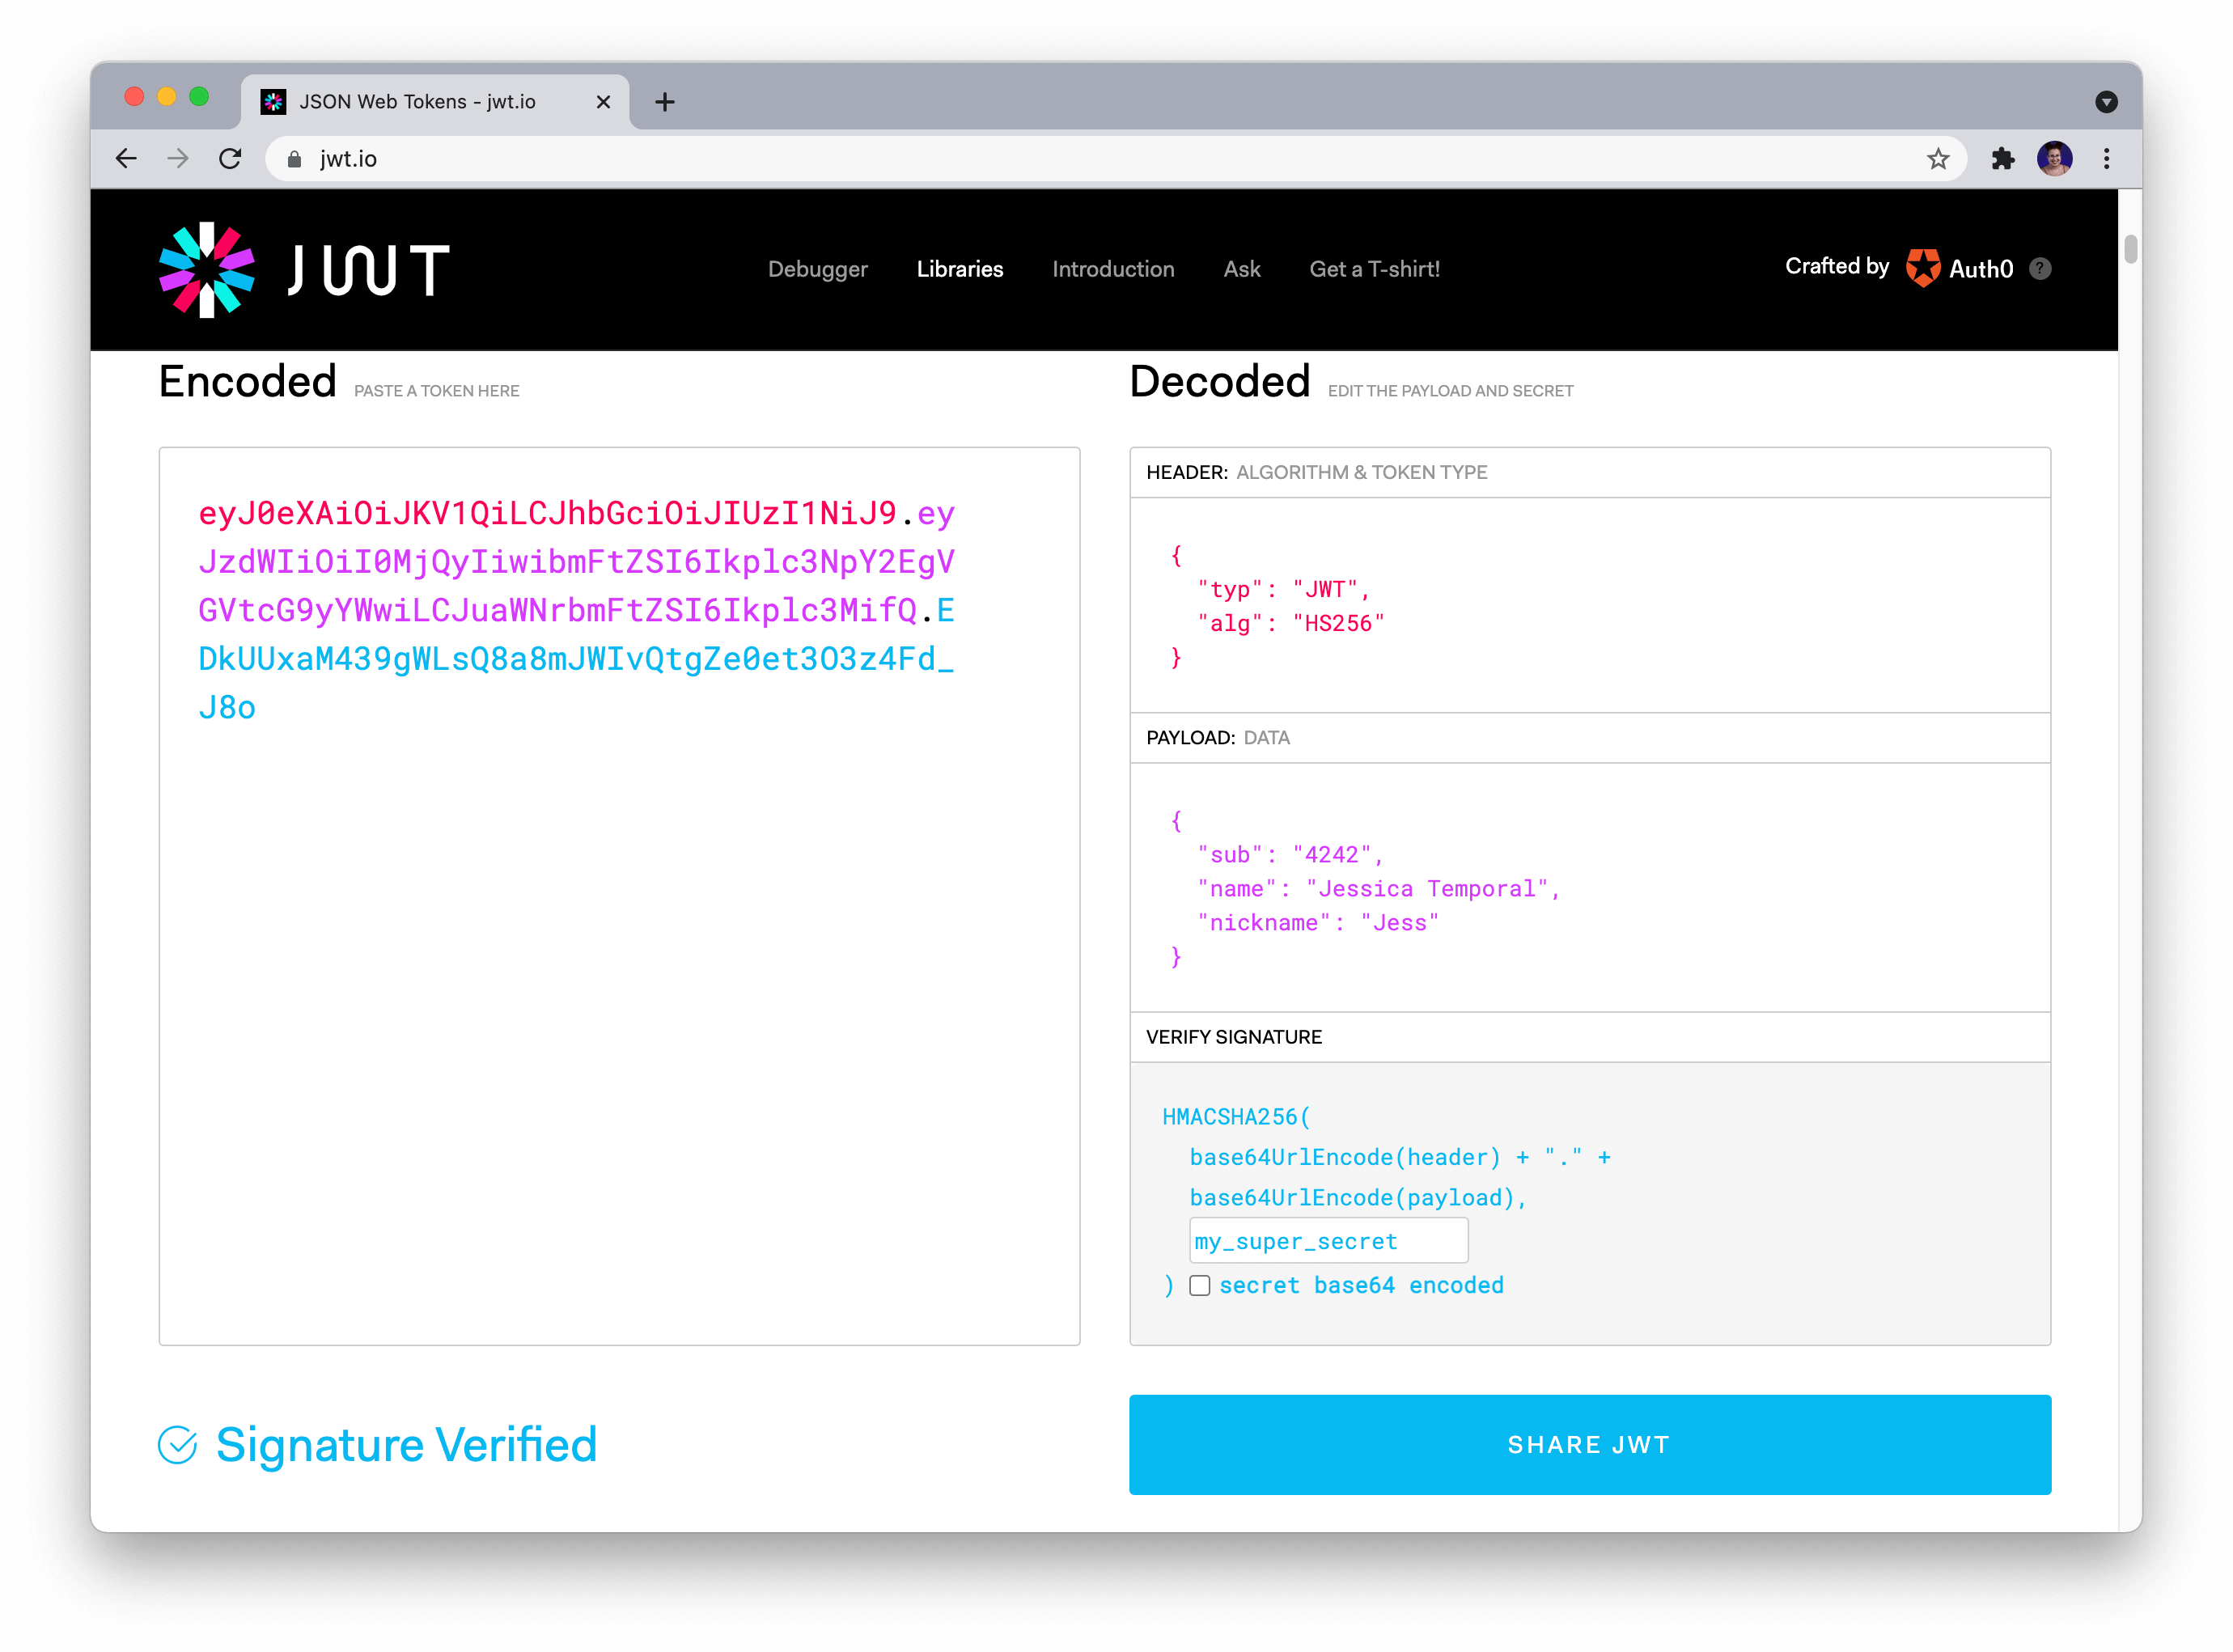 Screenshot of JWT.io showing the verified signature once the correct secret was pasted in the "secret" field